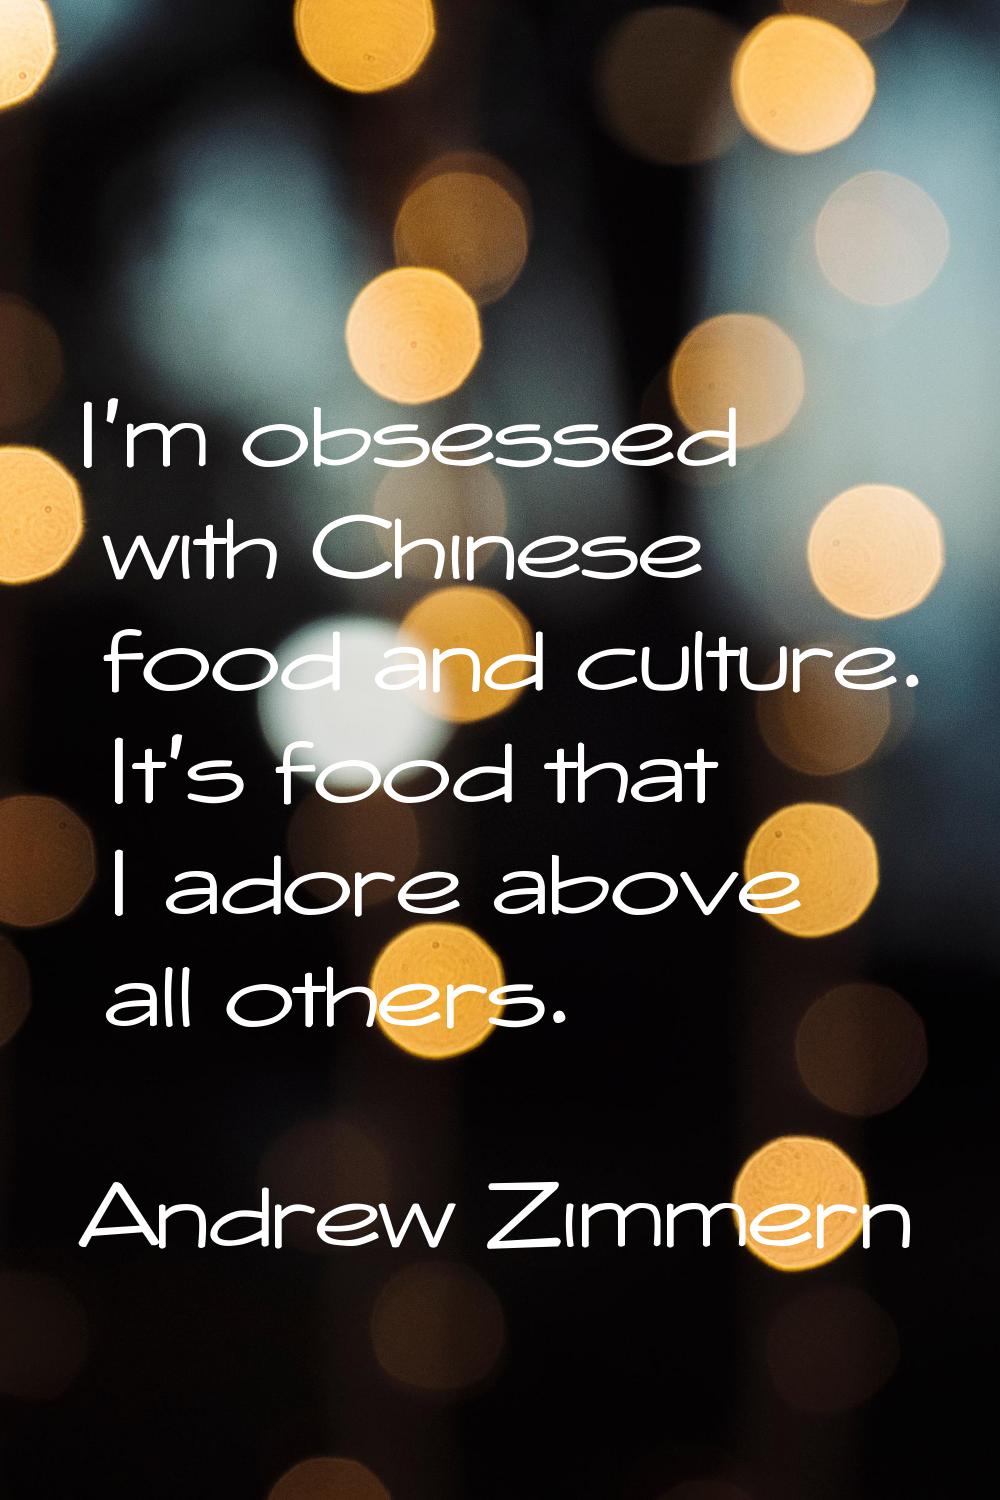 I'm obsessed with Chinese food and culture. It's food that I adore above all others.